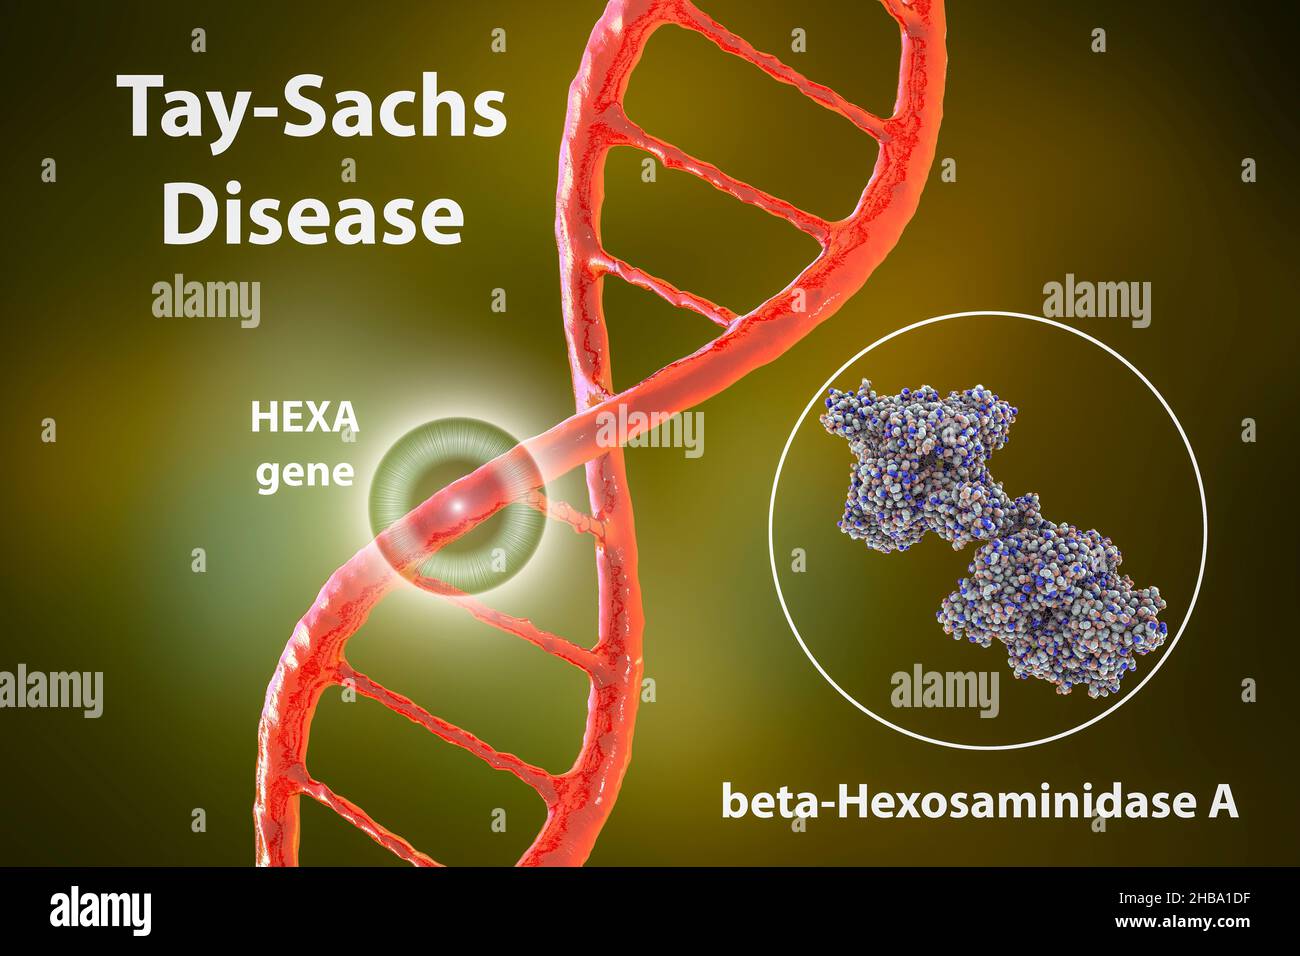 Tay-Sachs disease, illustration. A genetic disorder that progressively destroys brain neurons. It is caused by a mutation in the HEXA gene of chromosome 15 leading to deficiency of hexosaminidase A. Tay-sachs is most commonly seen in infants, manifesting in muscle weakness and decreased motor function, vision and hearing loss, and intellectual disability. Stock Photo